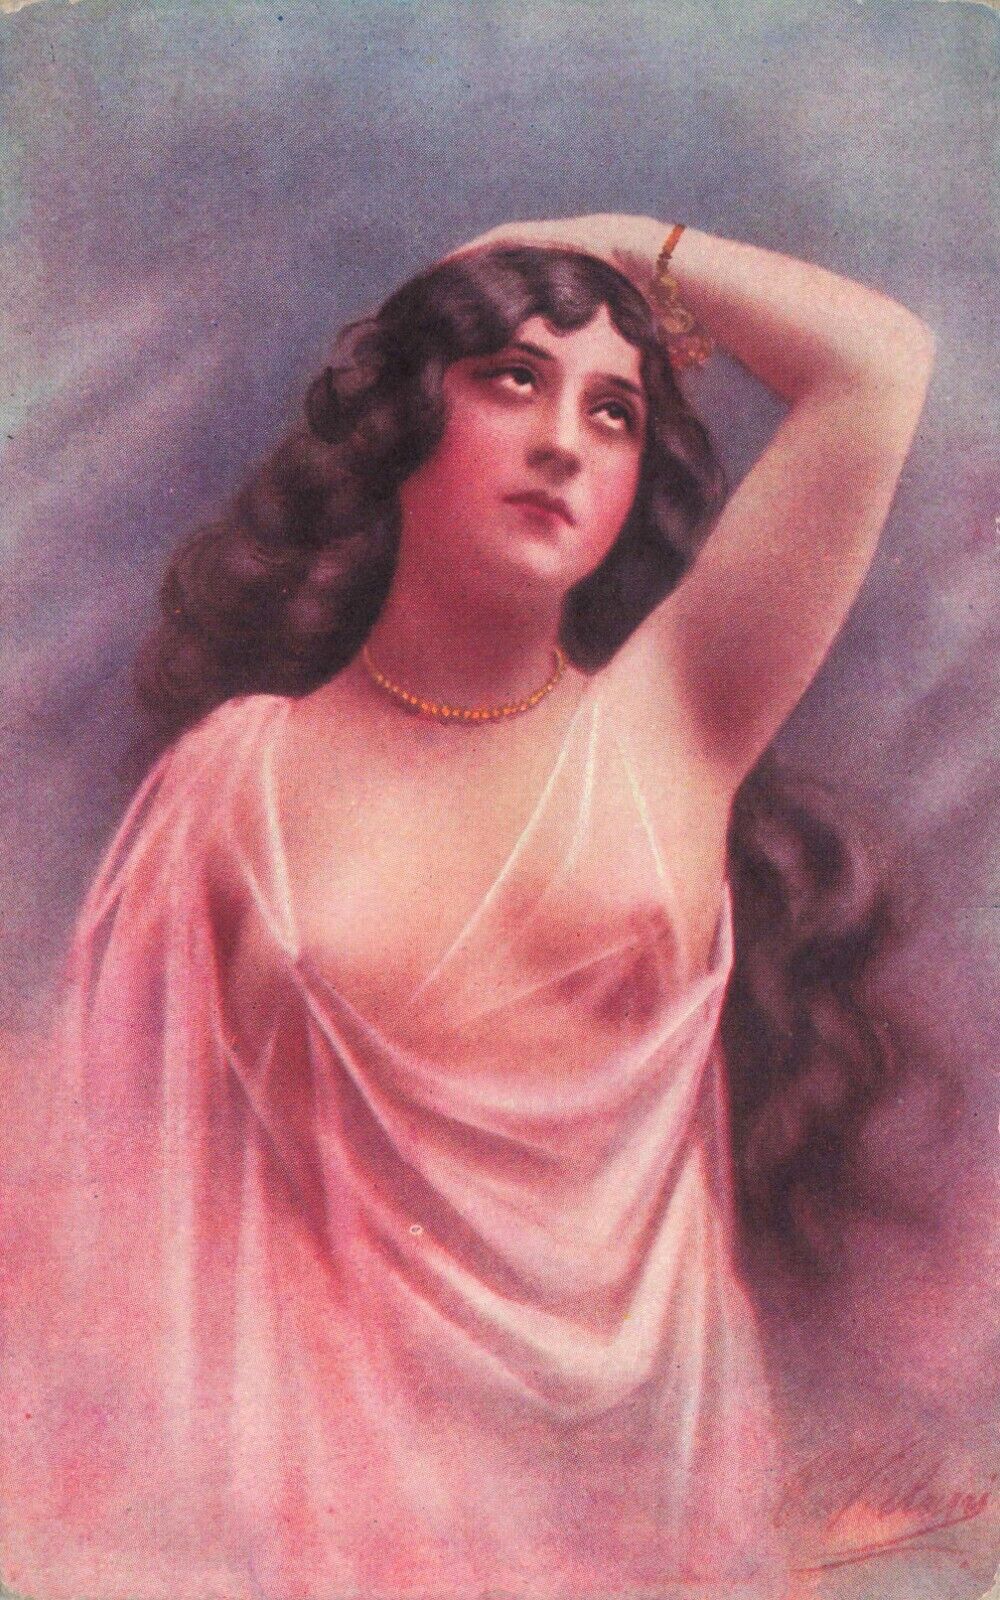 Vintage Risque Woman Showing Breasts Artist Signed Postcard from Italy